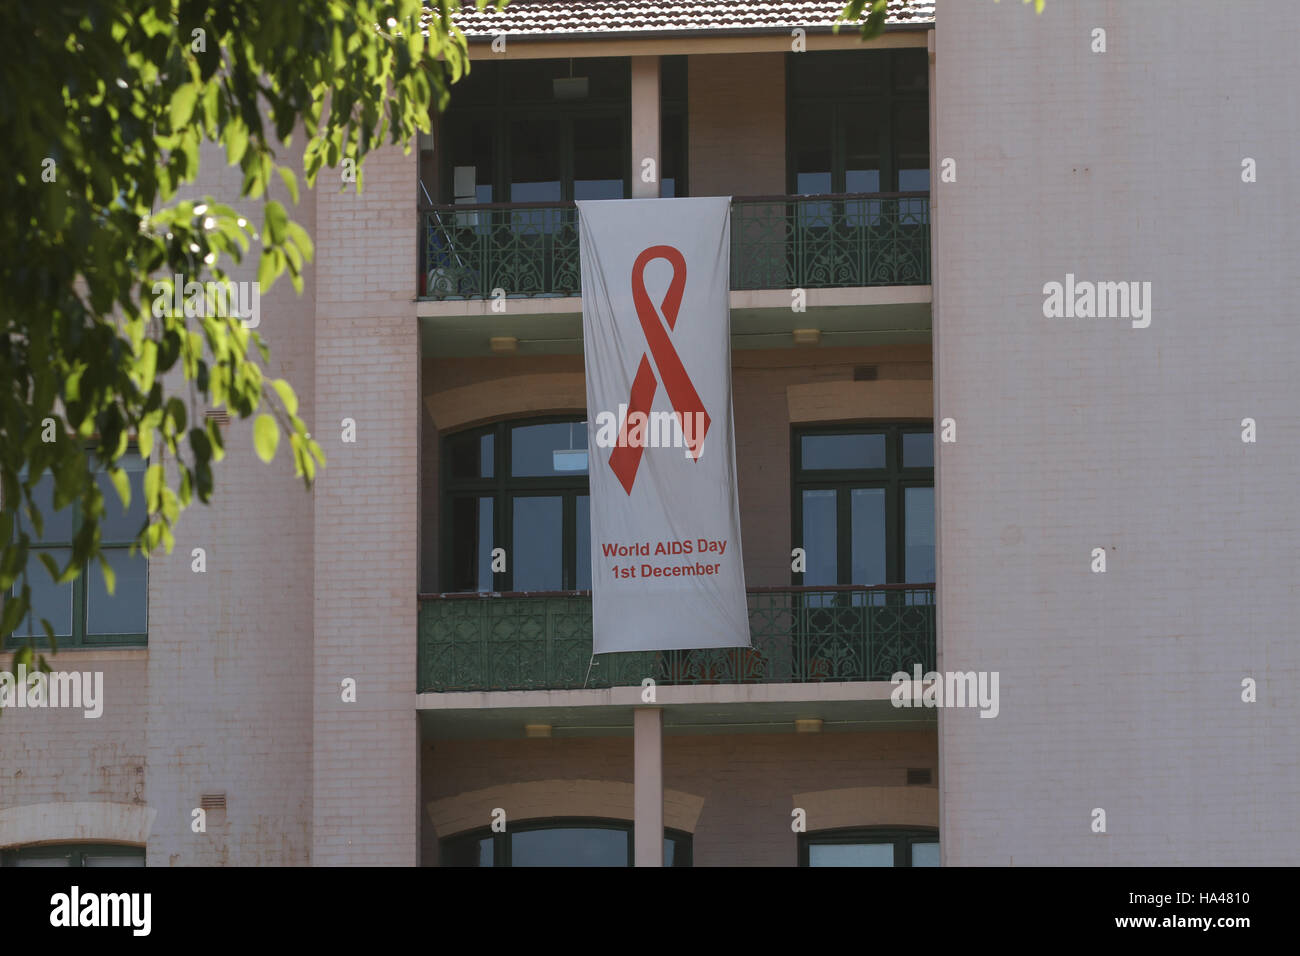 Sydney, Australia. 26 November 2016. Sydney Hospital promotes World AIDS Day, which is on 1 December each year. World AIDS Day raises awareness around Stock Photo